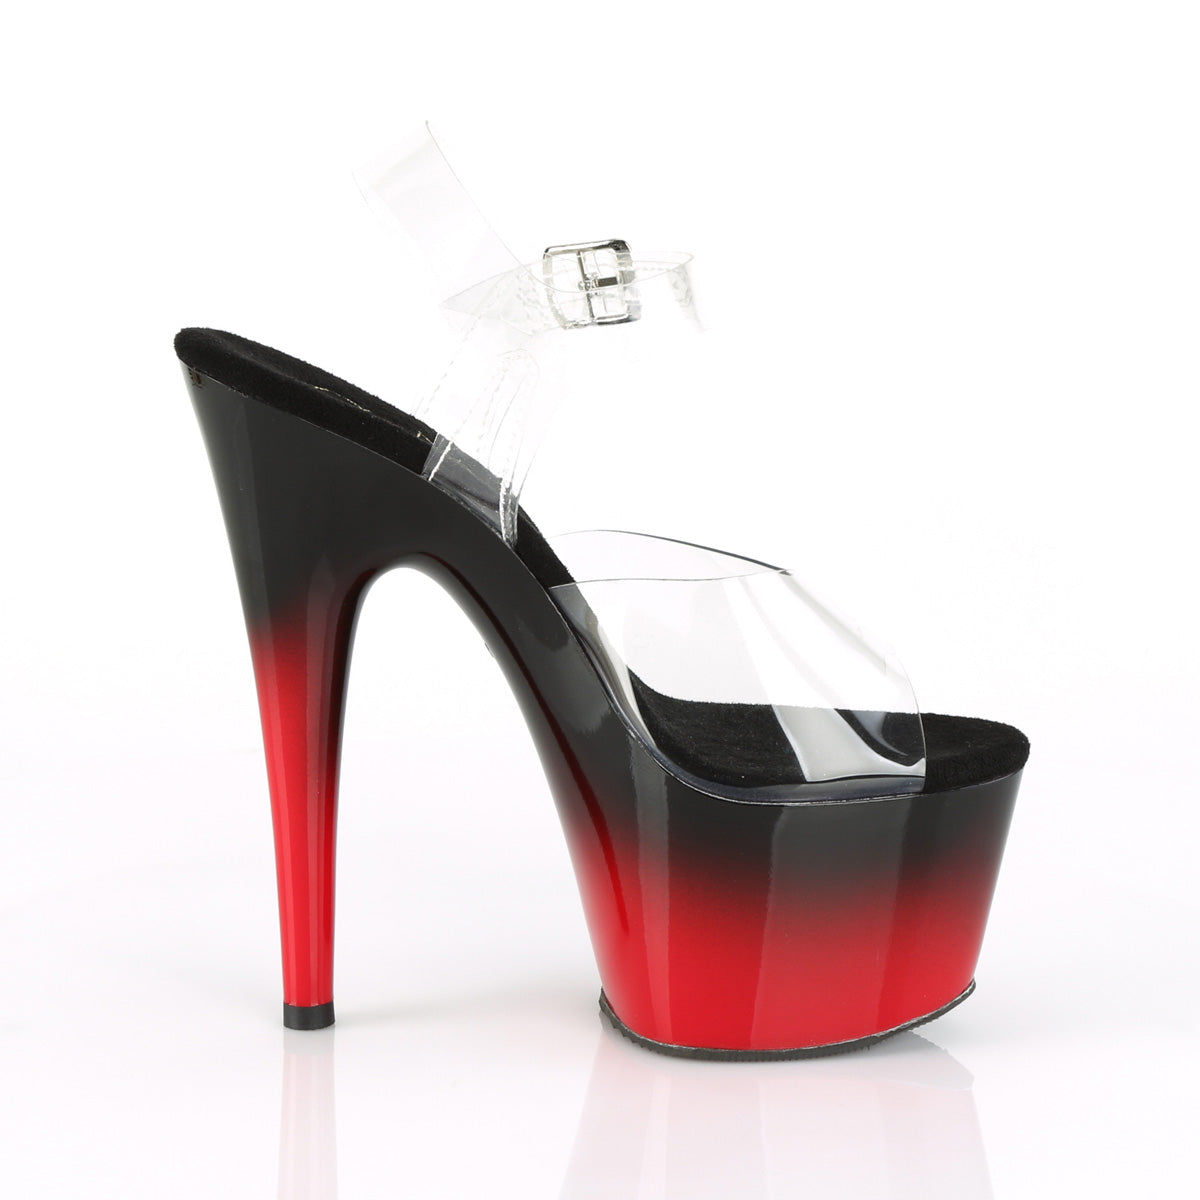 ADORE-708BR-H Clr/Blk-Red